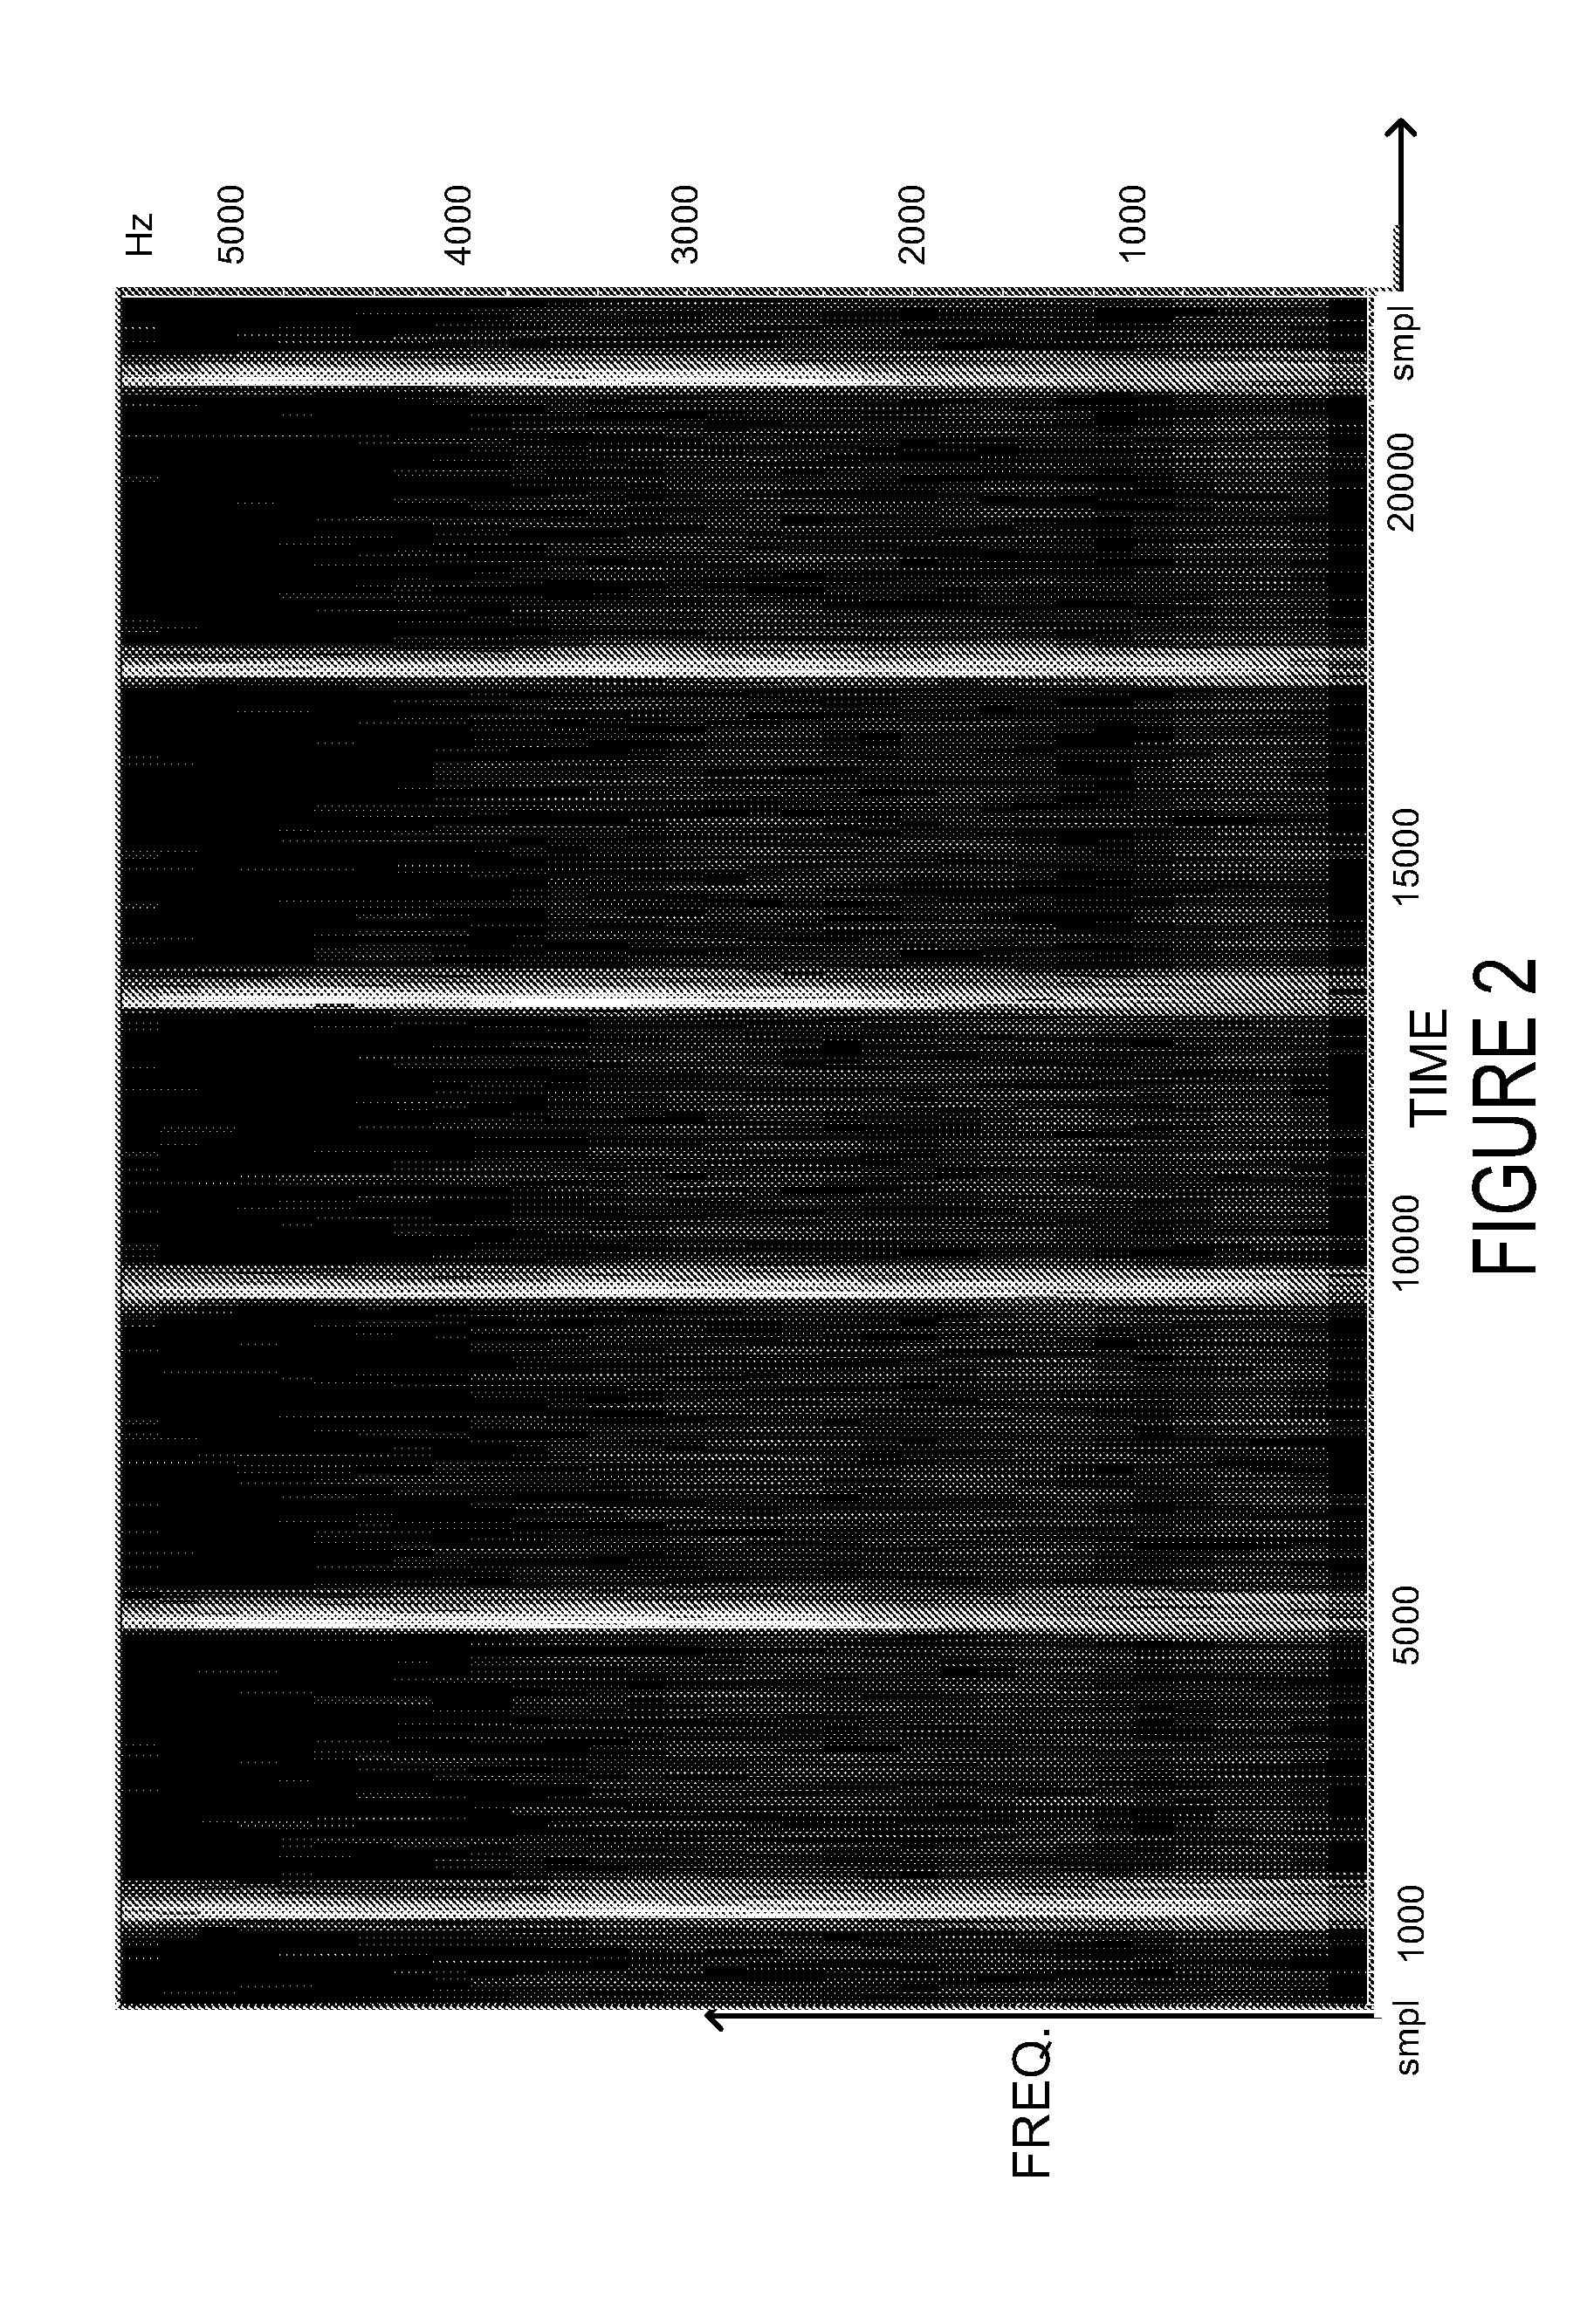 Repetitive Transient Noise Removal